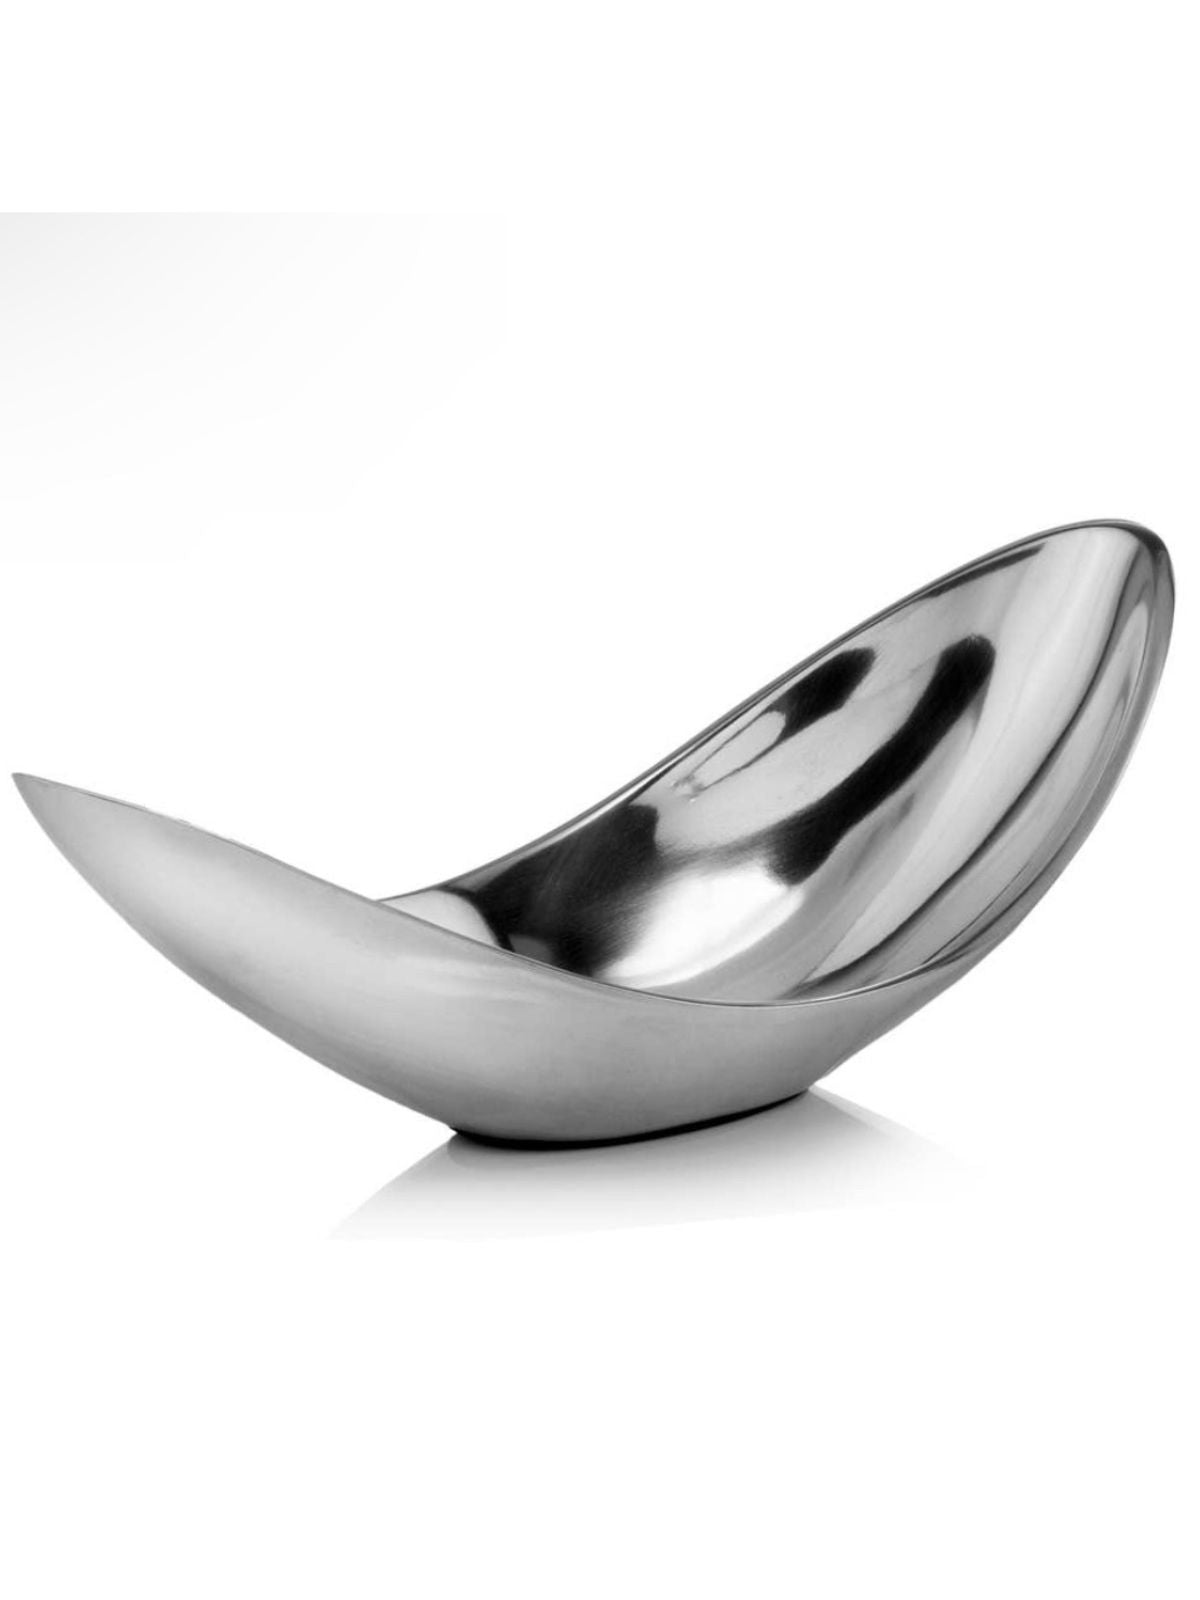 L Silver Twisted Decorative Bowl sold by KYA Home Decor.